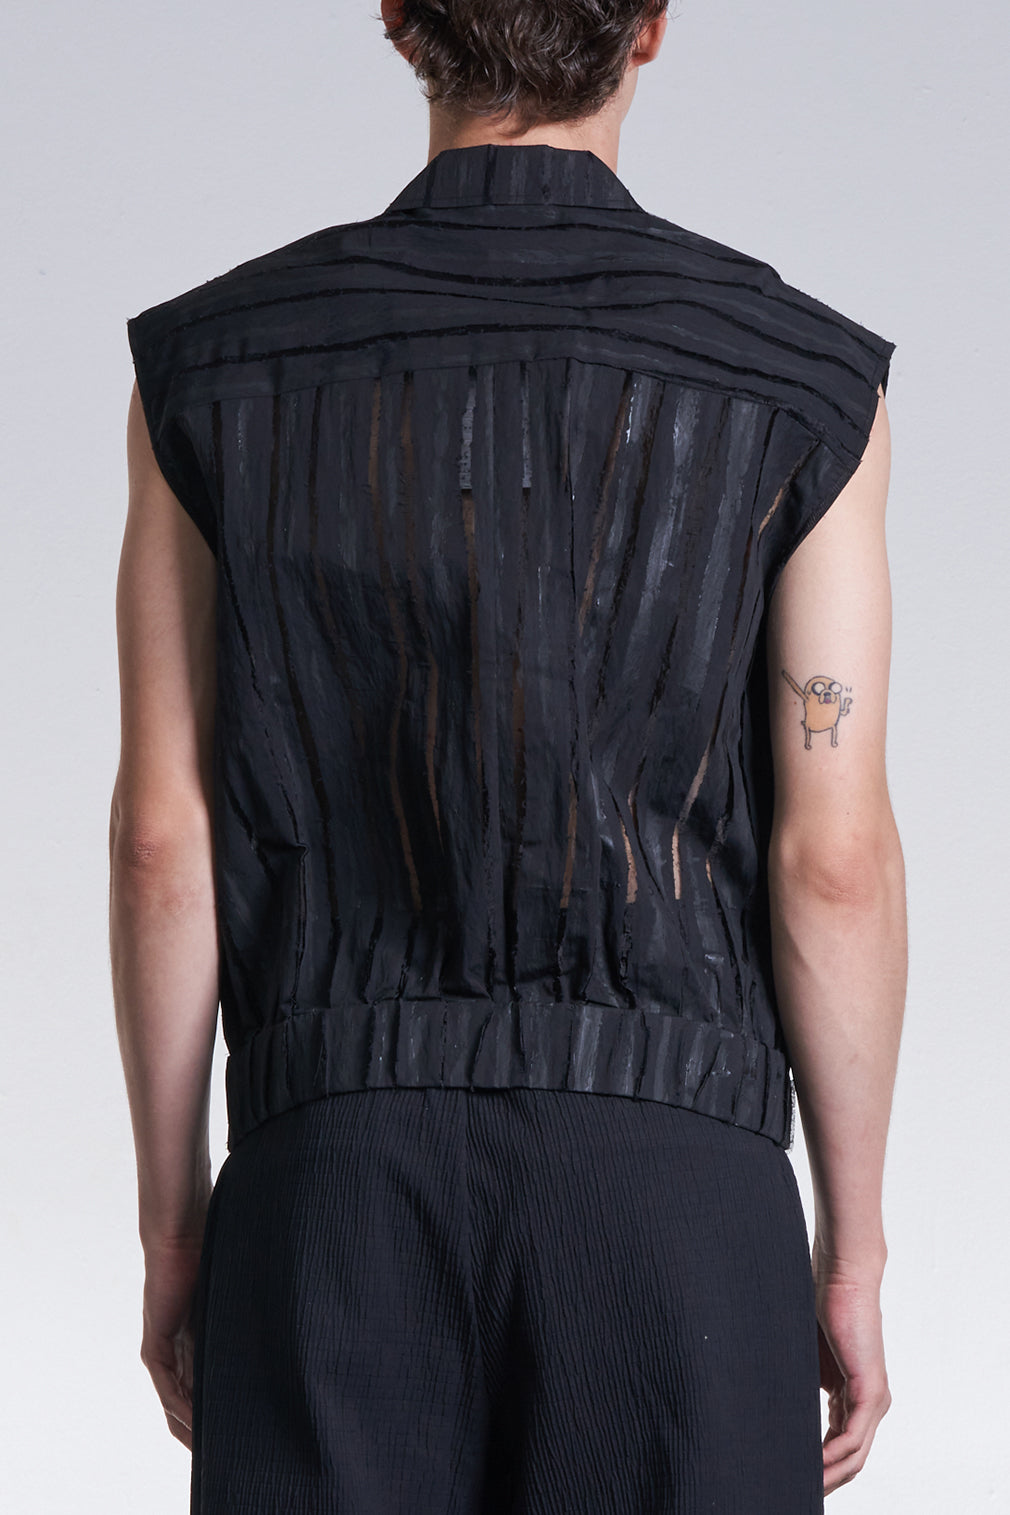 Sleeveless Jacket With Burnt Out And Hand Print Stripe